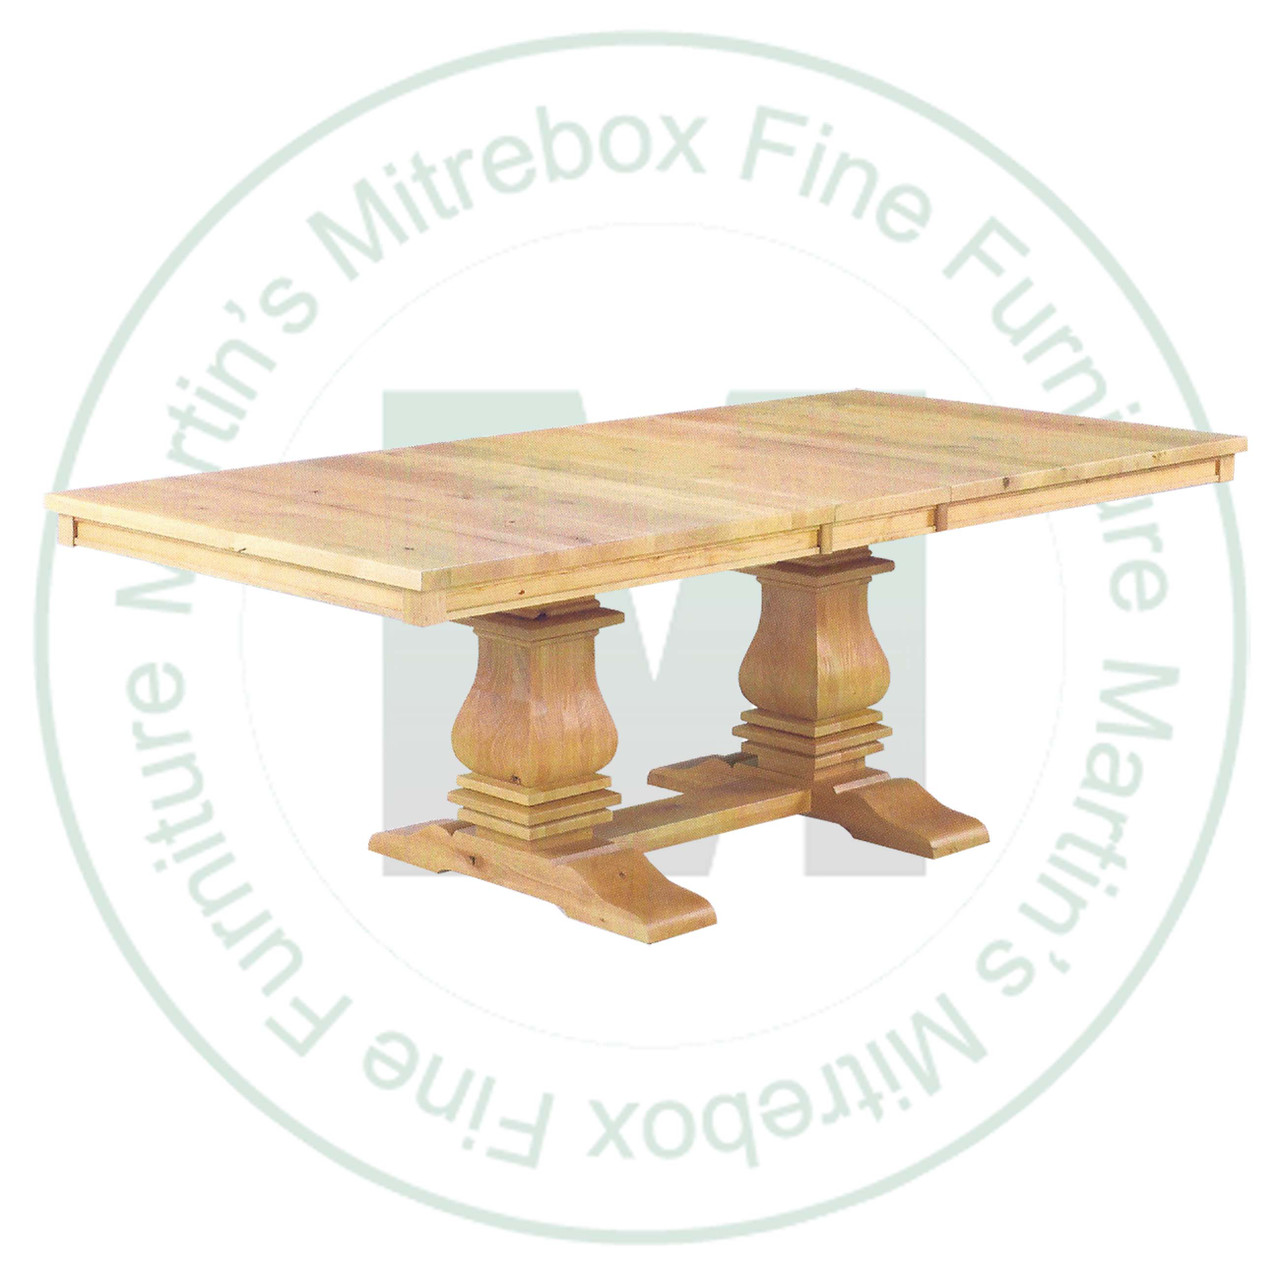 Maple Mediterranean Solid Top Pedestal Table 48''D x 96''W x 30''H. Table Has 1.25'' Thick Top